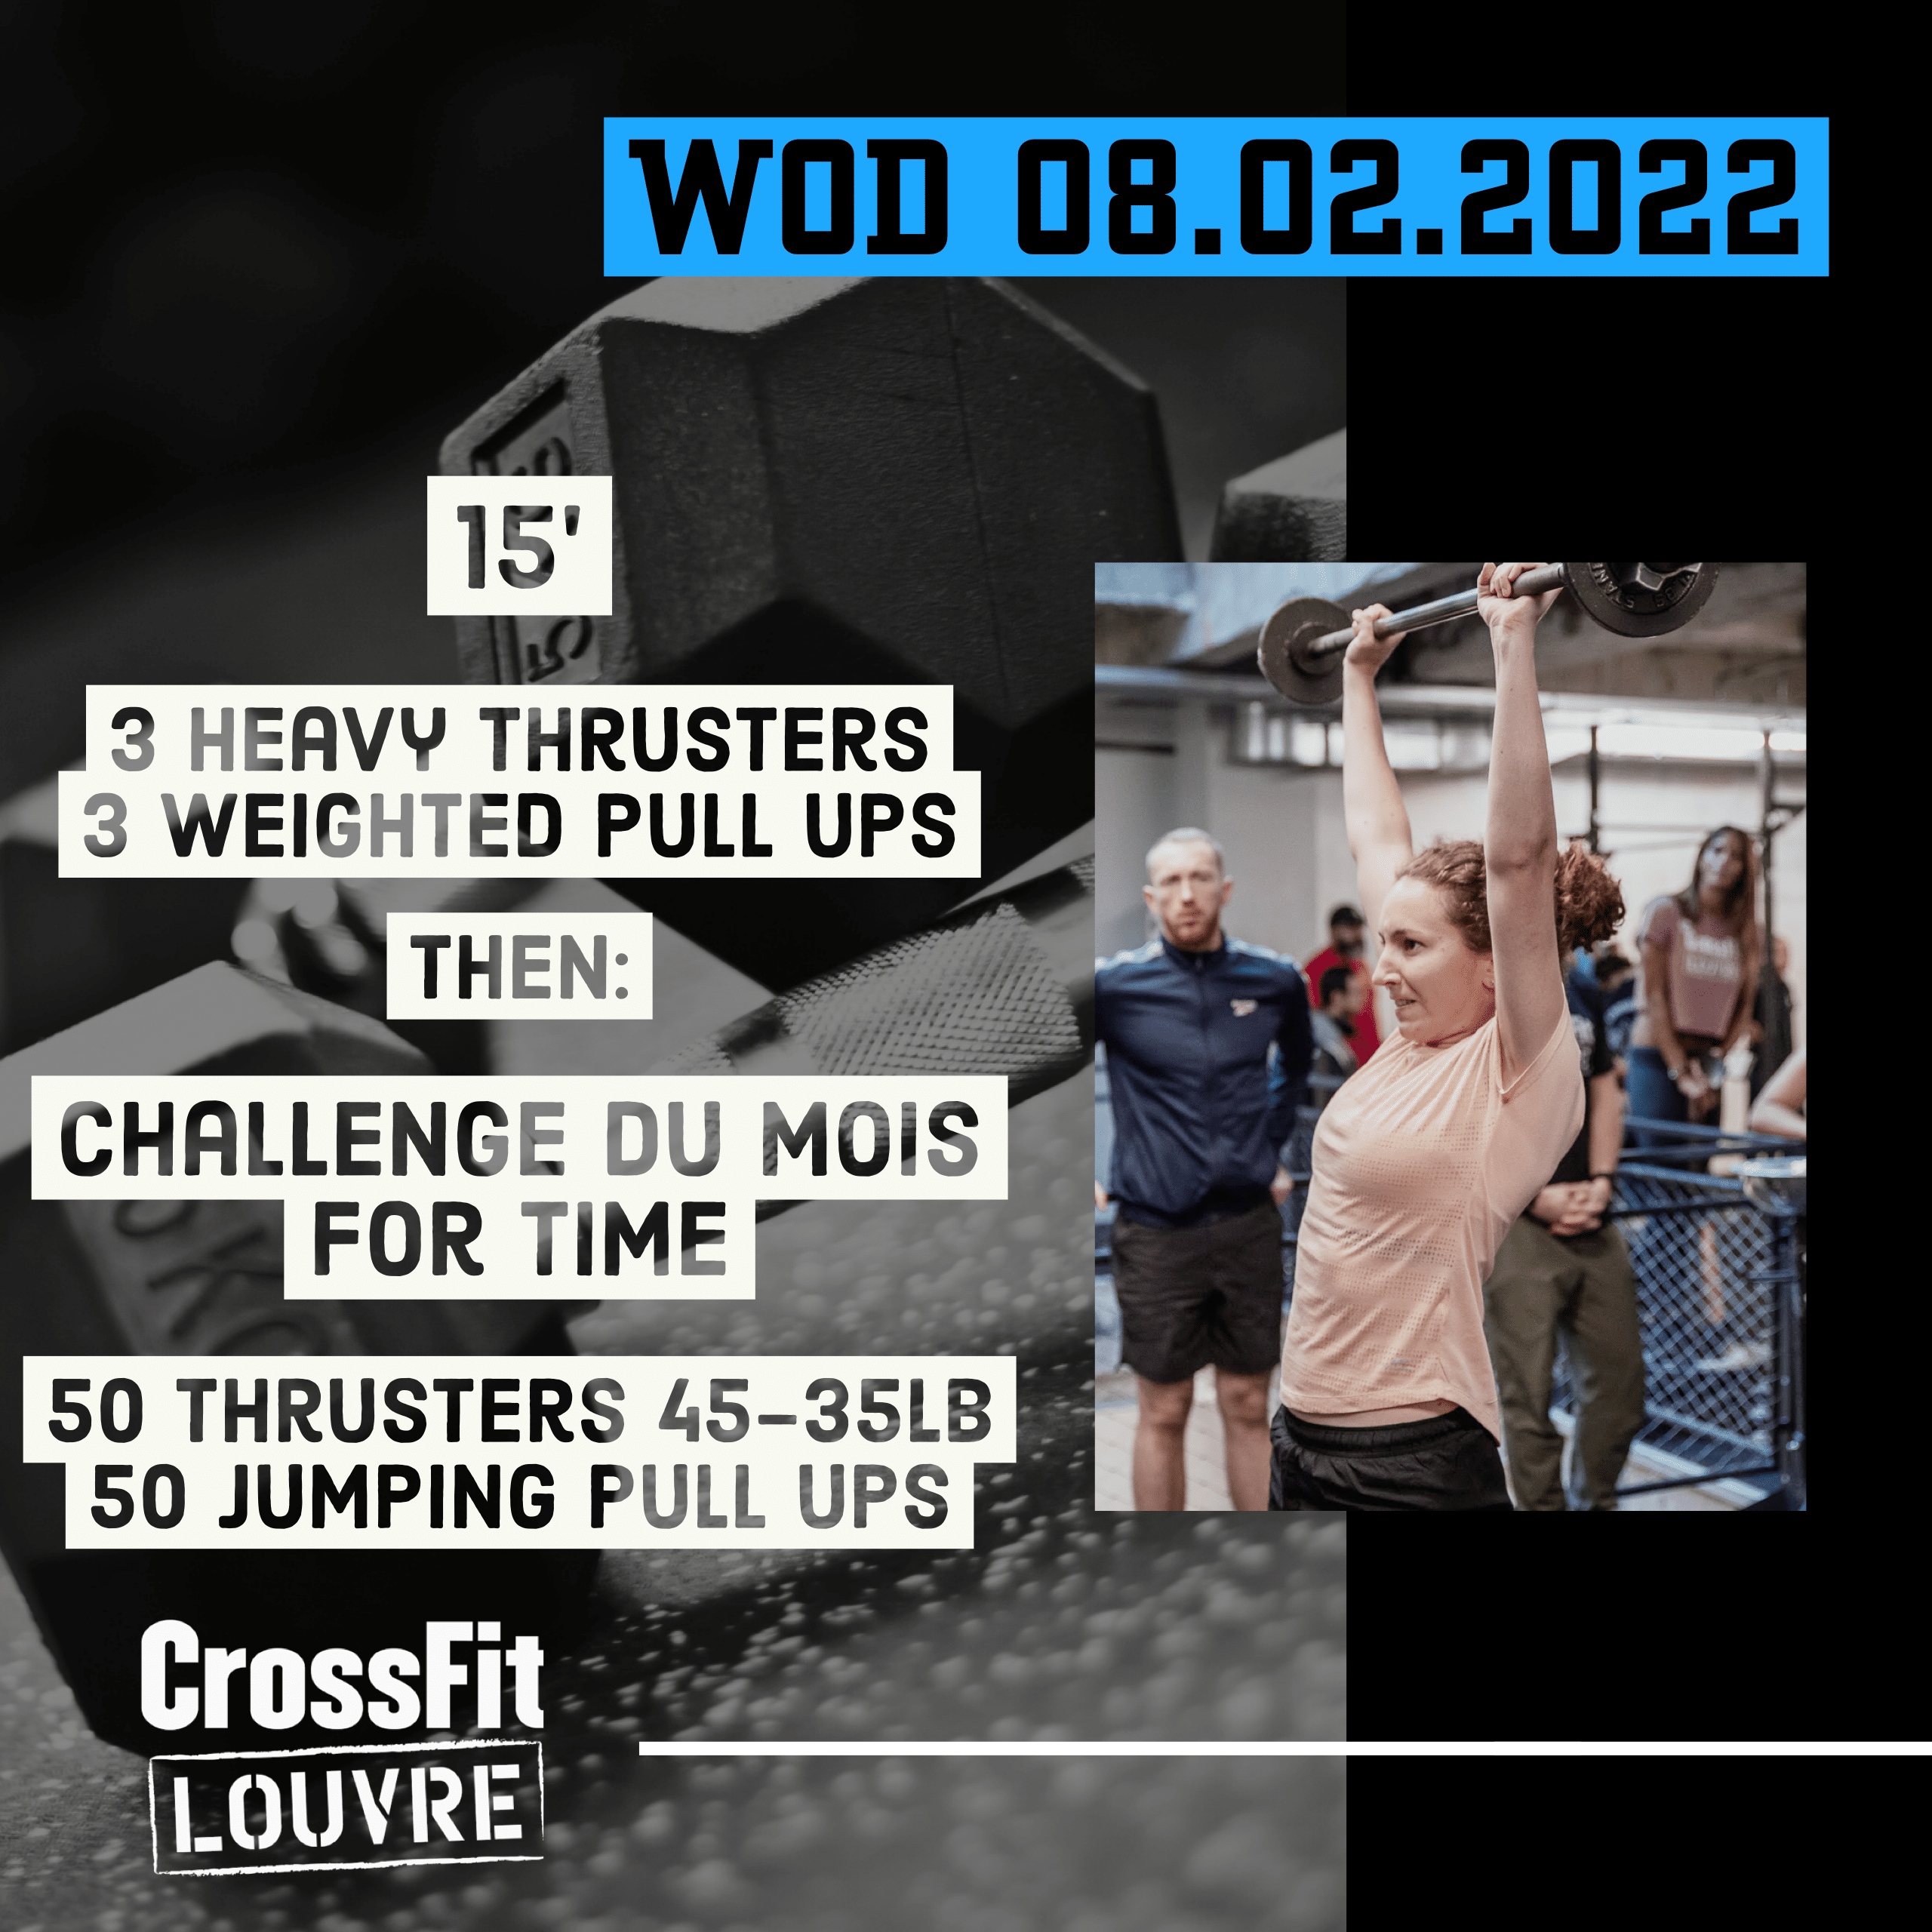 For Time thrusters Jumping Pull Up Challenge du mois